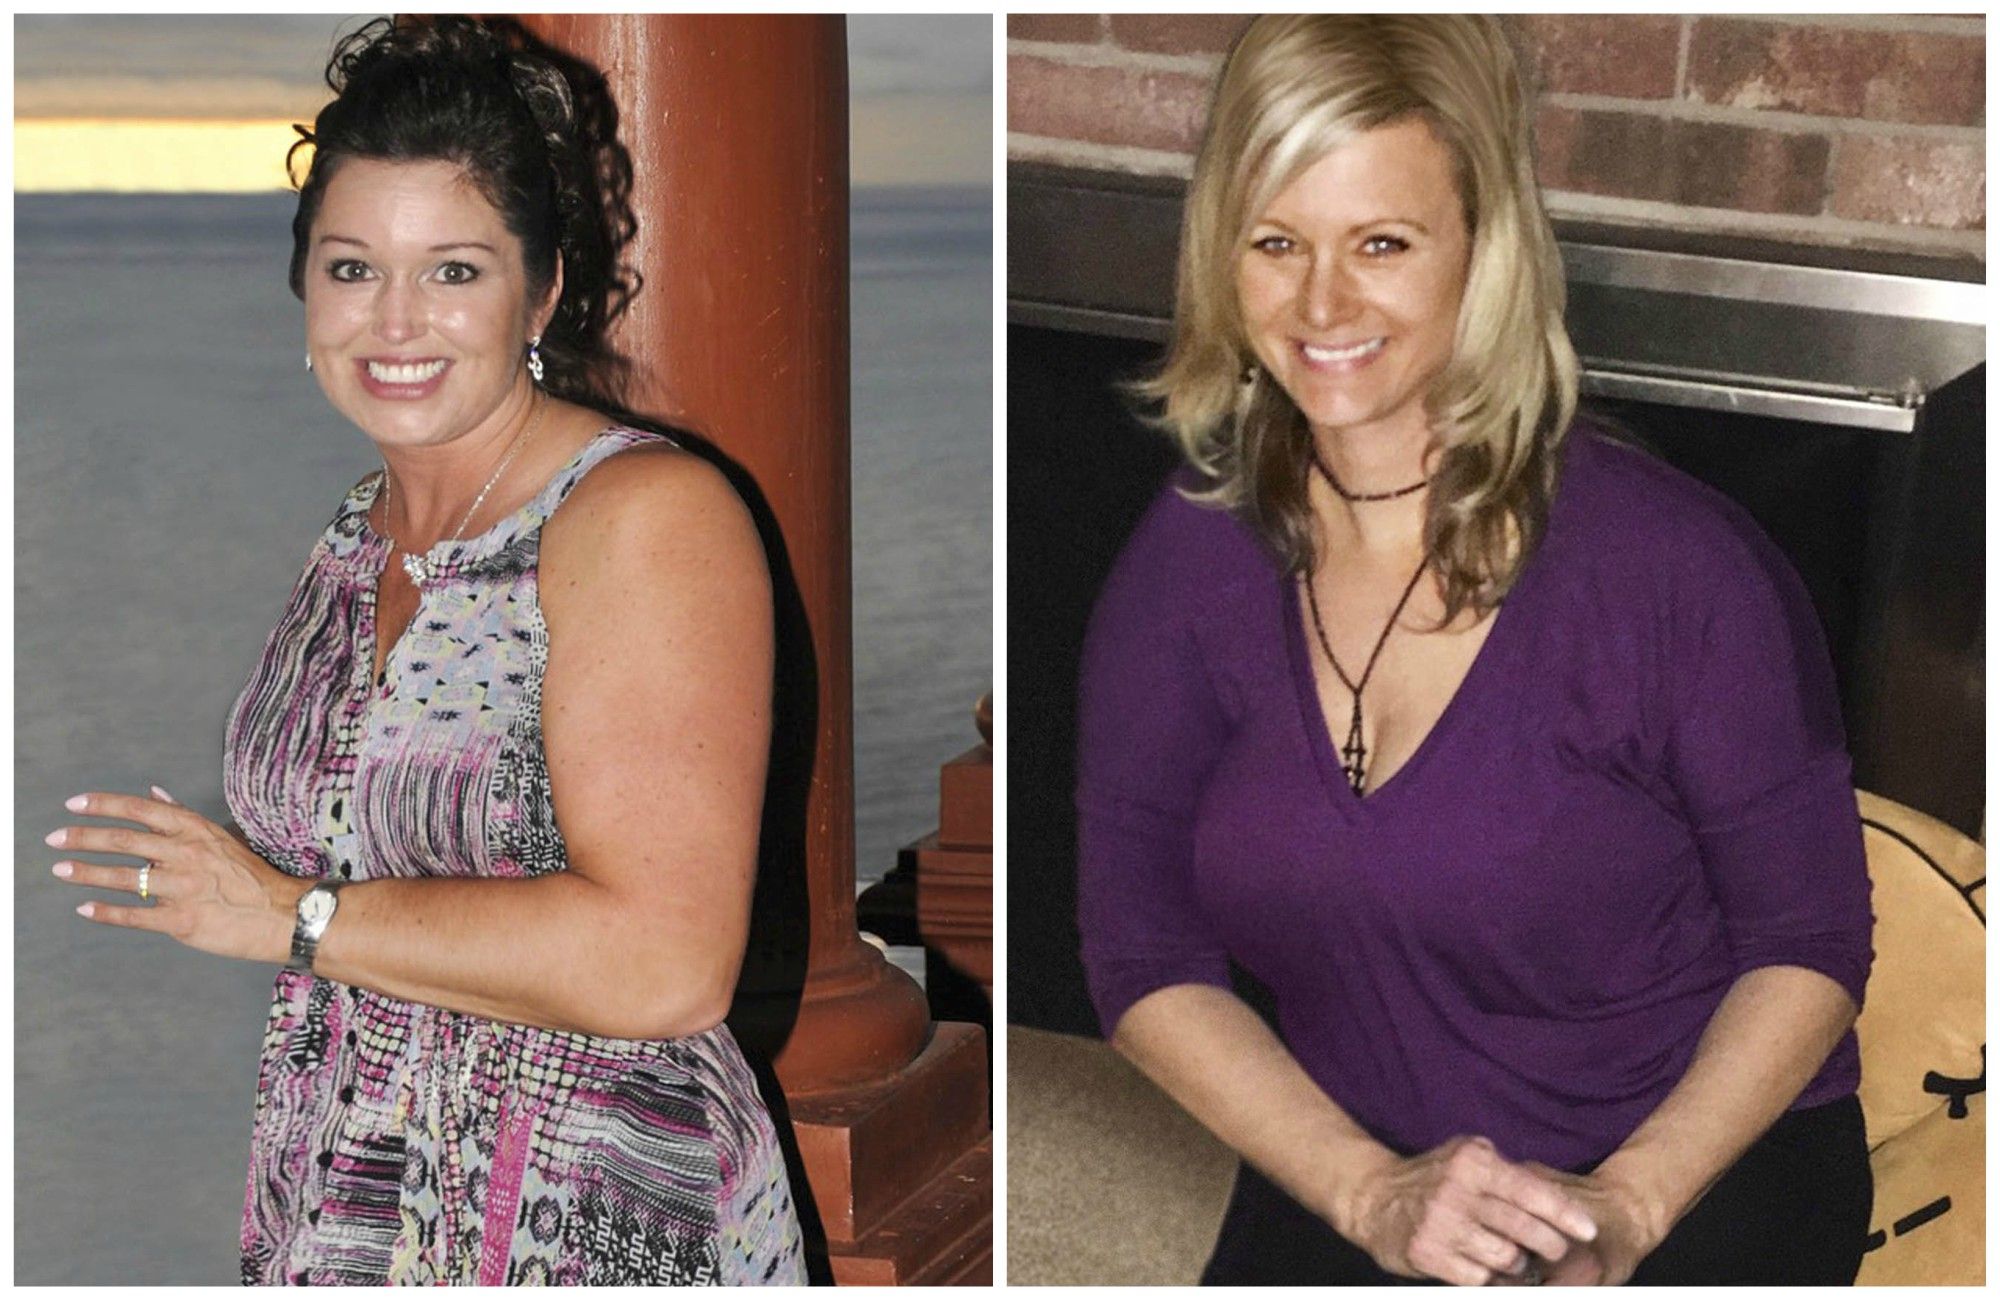 Weight Loss Success Stories: Inspiring Before & After Pics